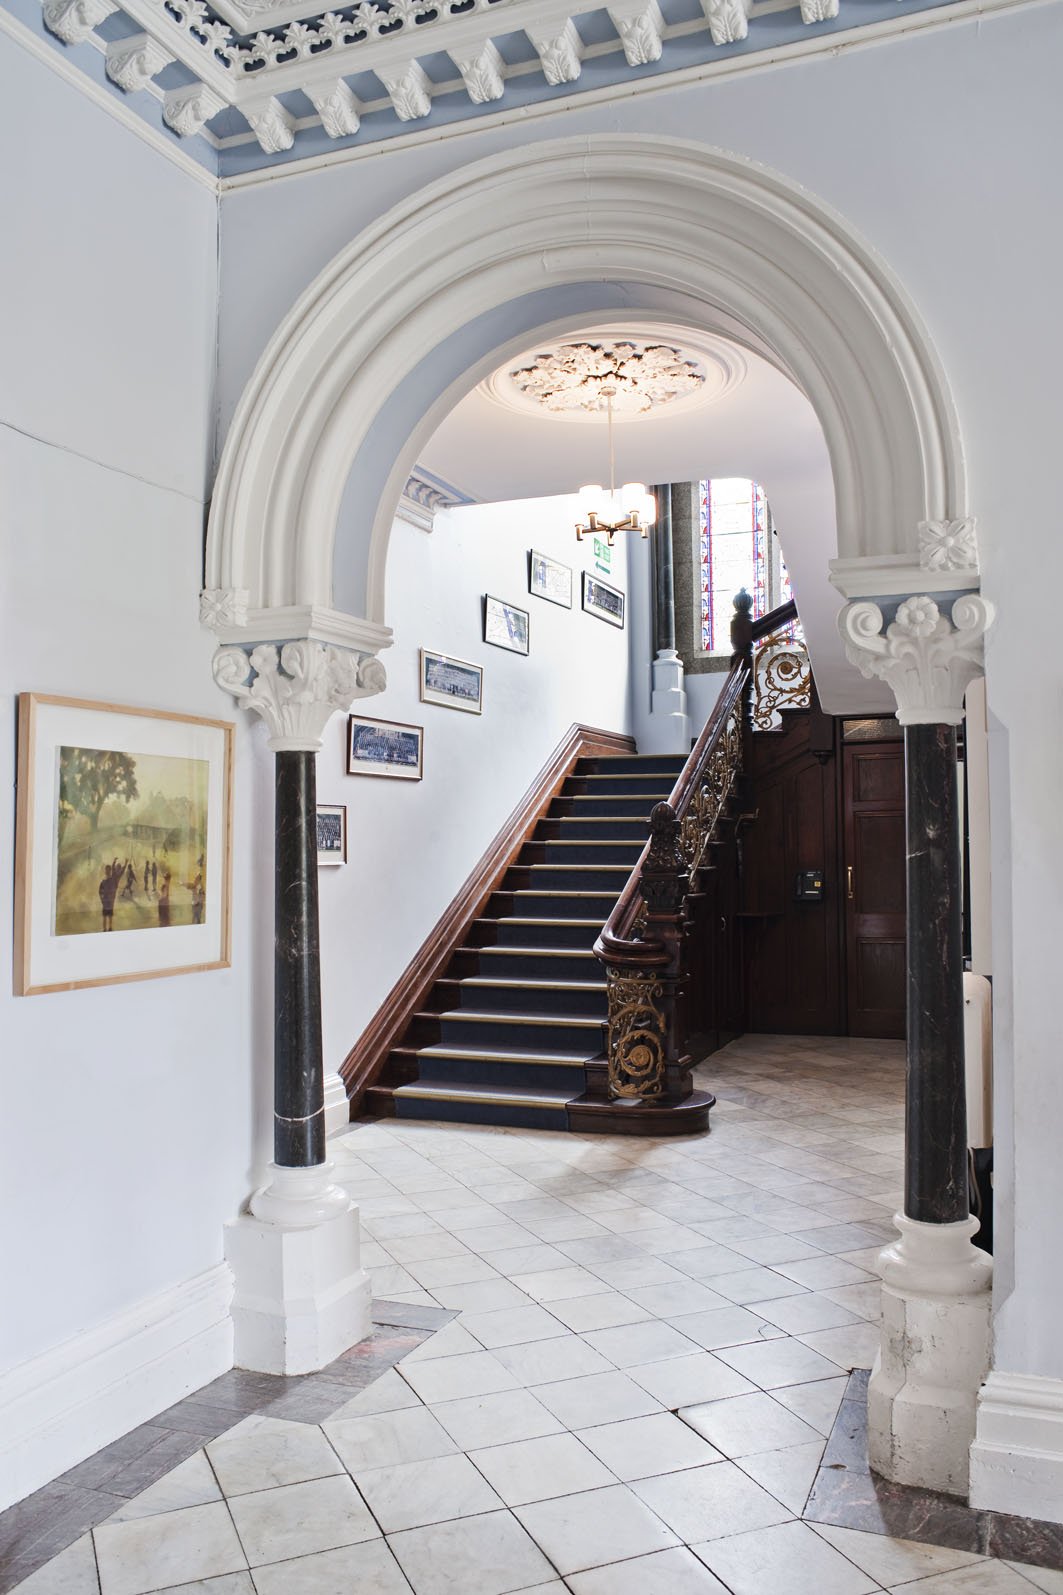 Marble Hallway Leading to Grand Staircase and Stained Glass Window on Landing.jpg